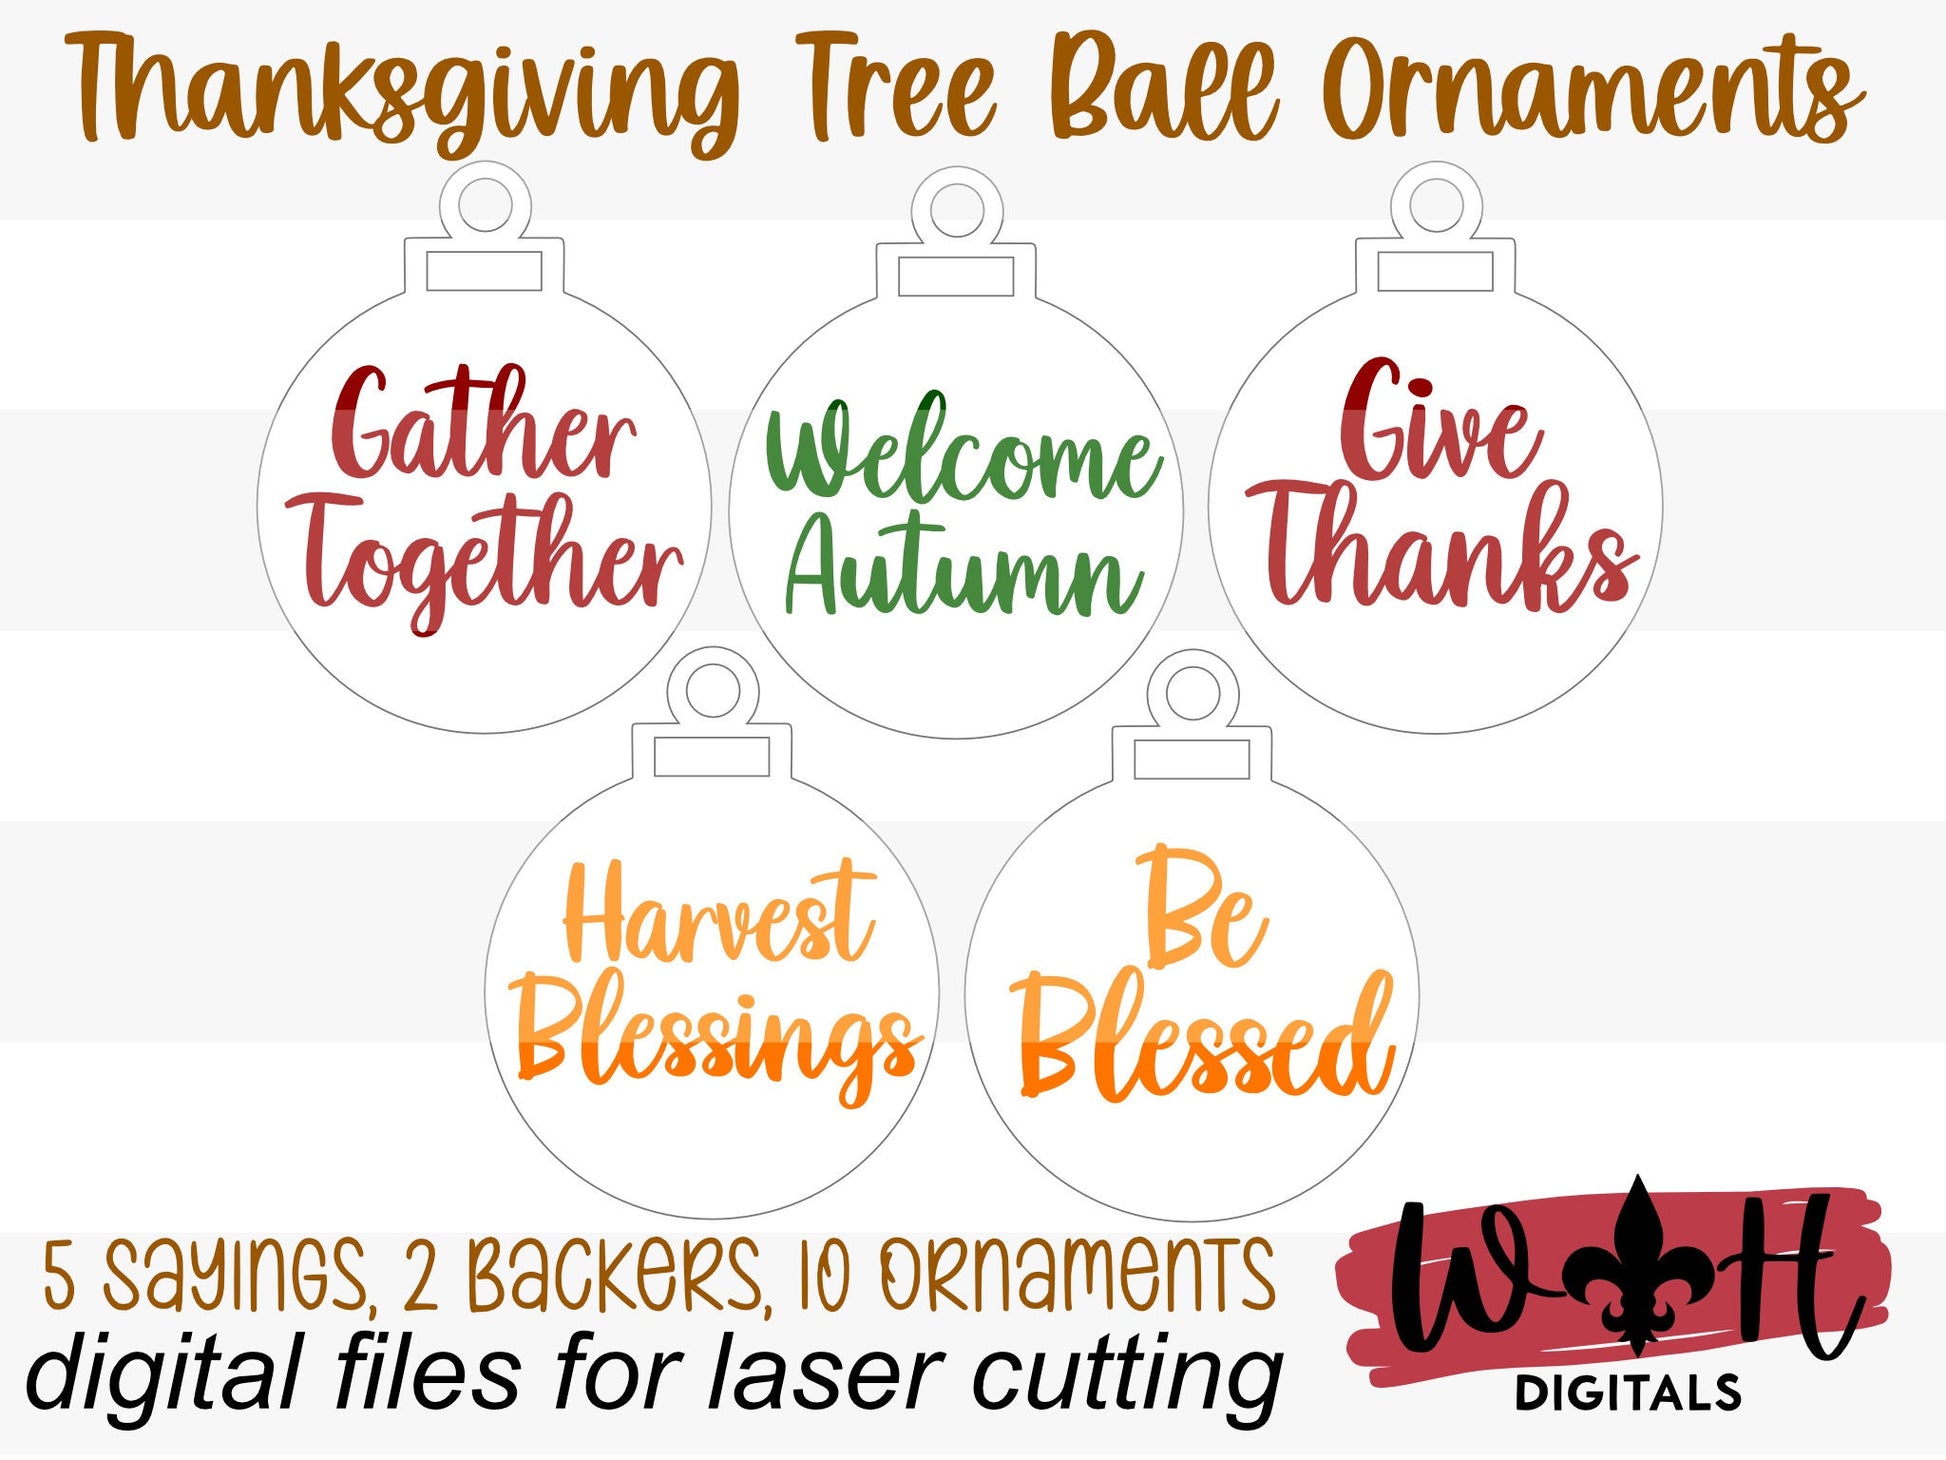 Thanksgiving Tree Ball Ornaments - Shiplap Farmhouse Style - Digital Files for Sign Making - SVG Cut File For Glowforge - Digital File